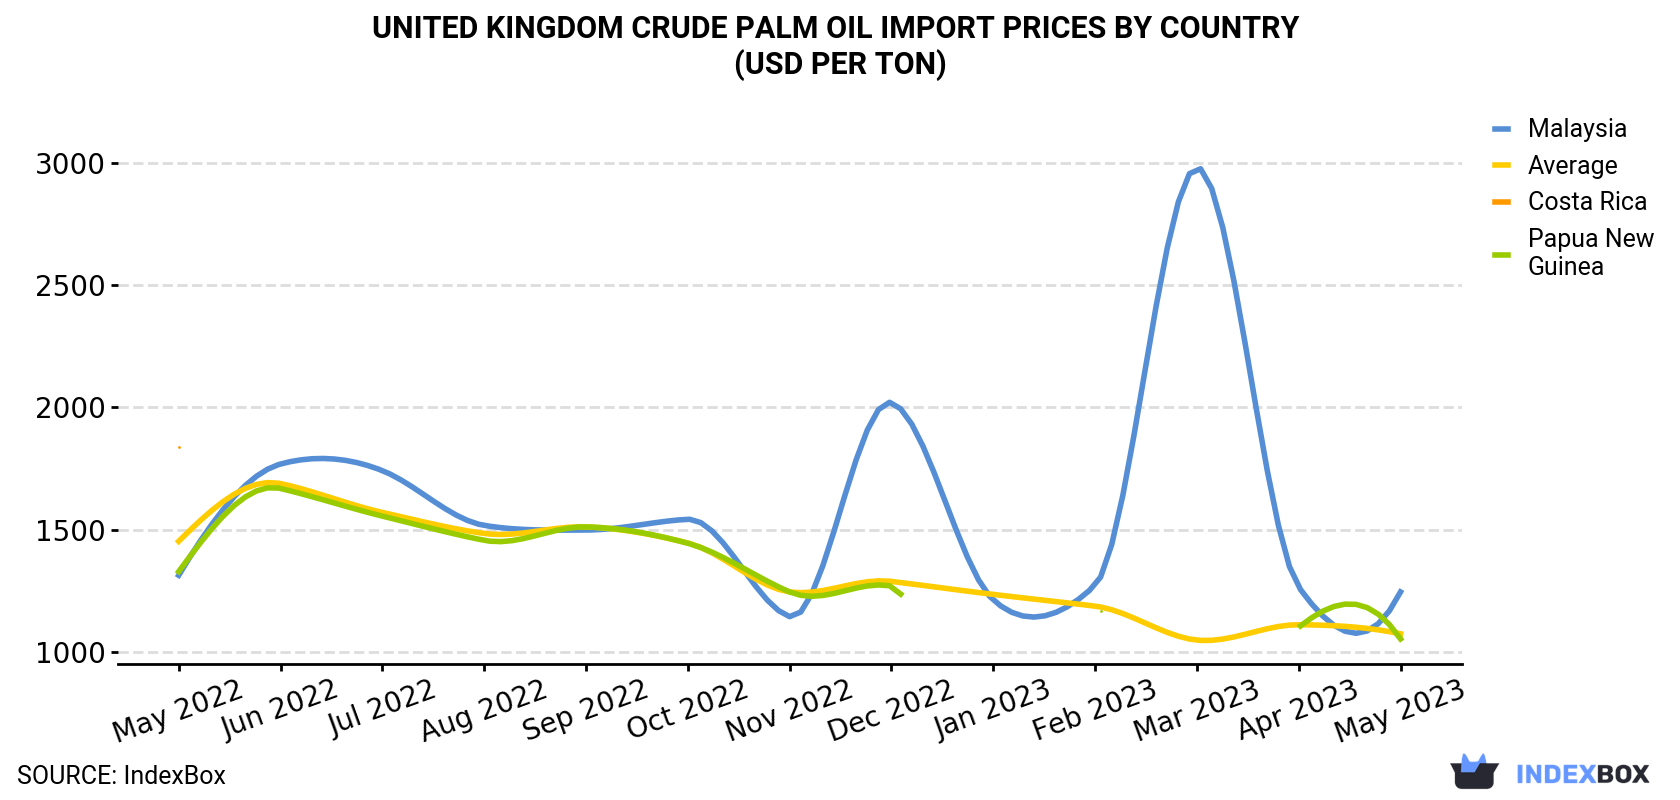 United Kingdom Crude Palm Oil Import Prices By Country (USD Per Ton)